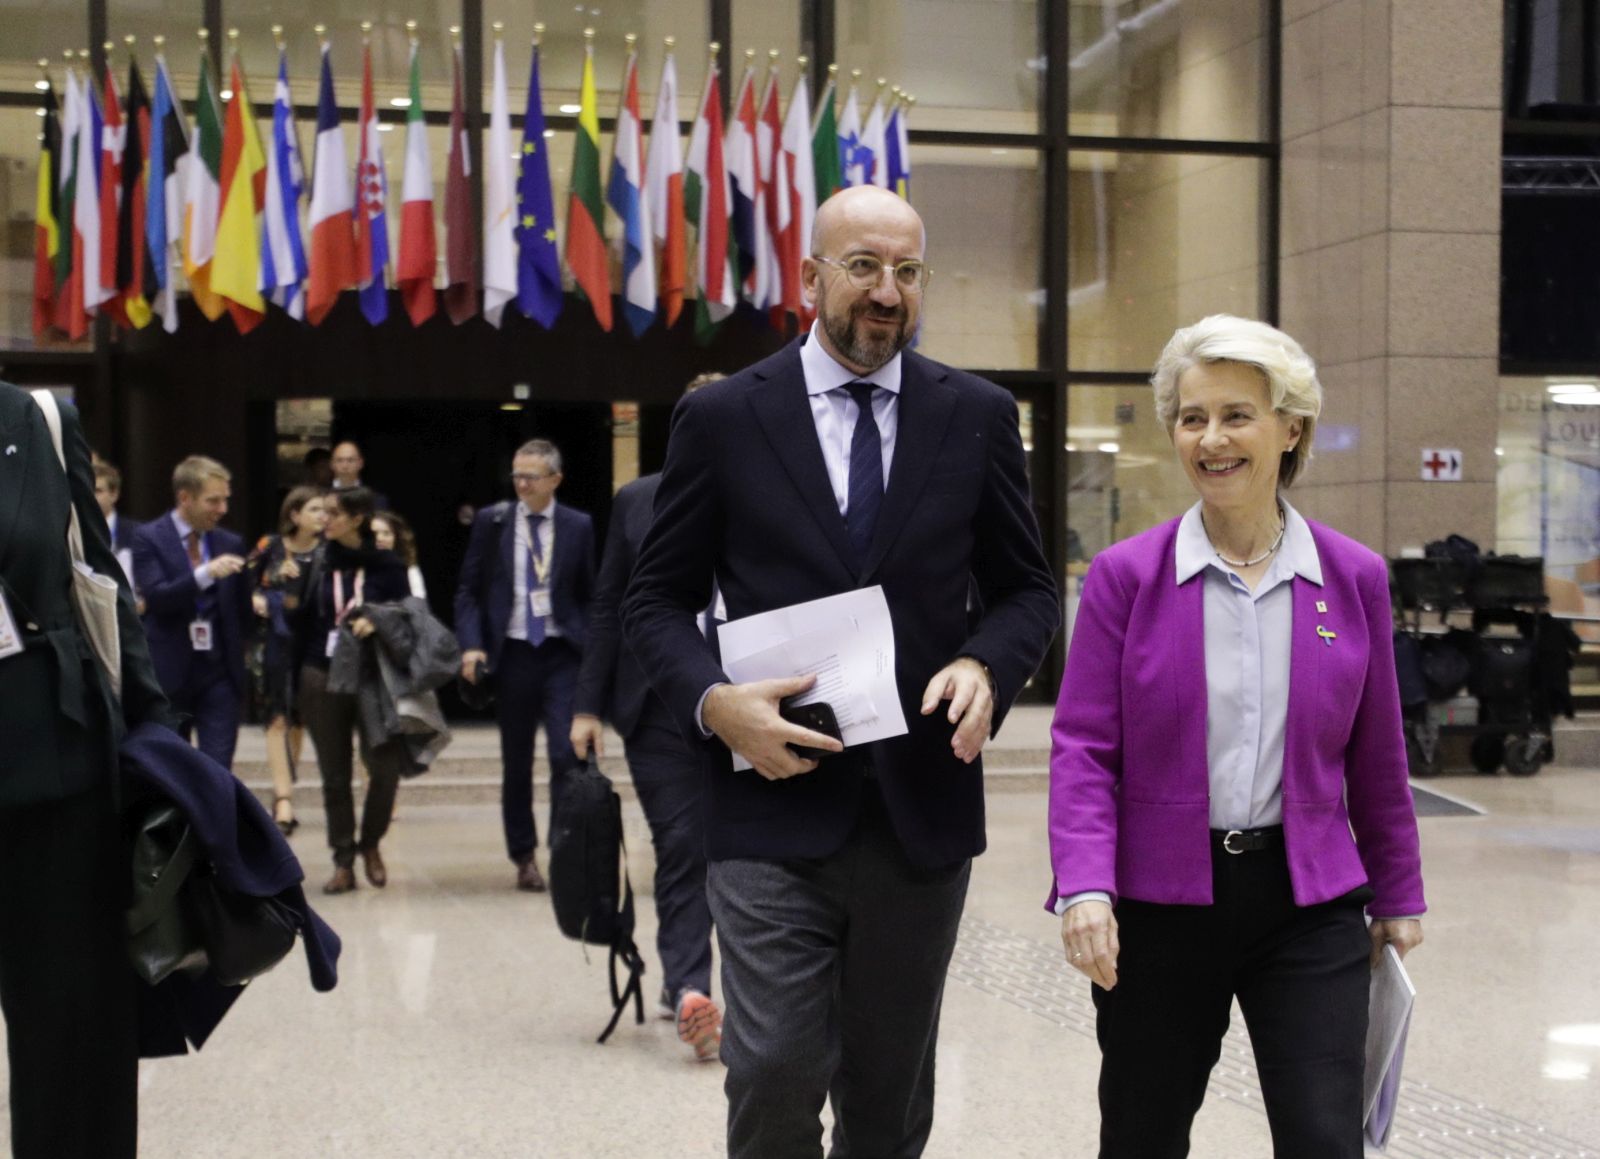 epa10255929 European Council President Charles Michel and European Commission President Ursula von der Leyen on the way to a press conference at the end of first day of an EU Summit in Brussels, Belgium, 21 October 2022. EU leaders reached an agreement on Energy prices and agreed to work on measures to contain energy price.  EPA/OLIVIER HOSLET